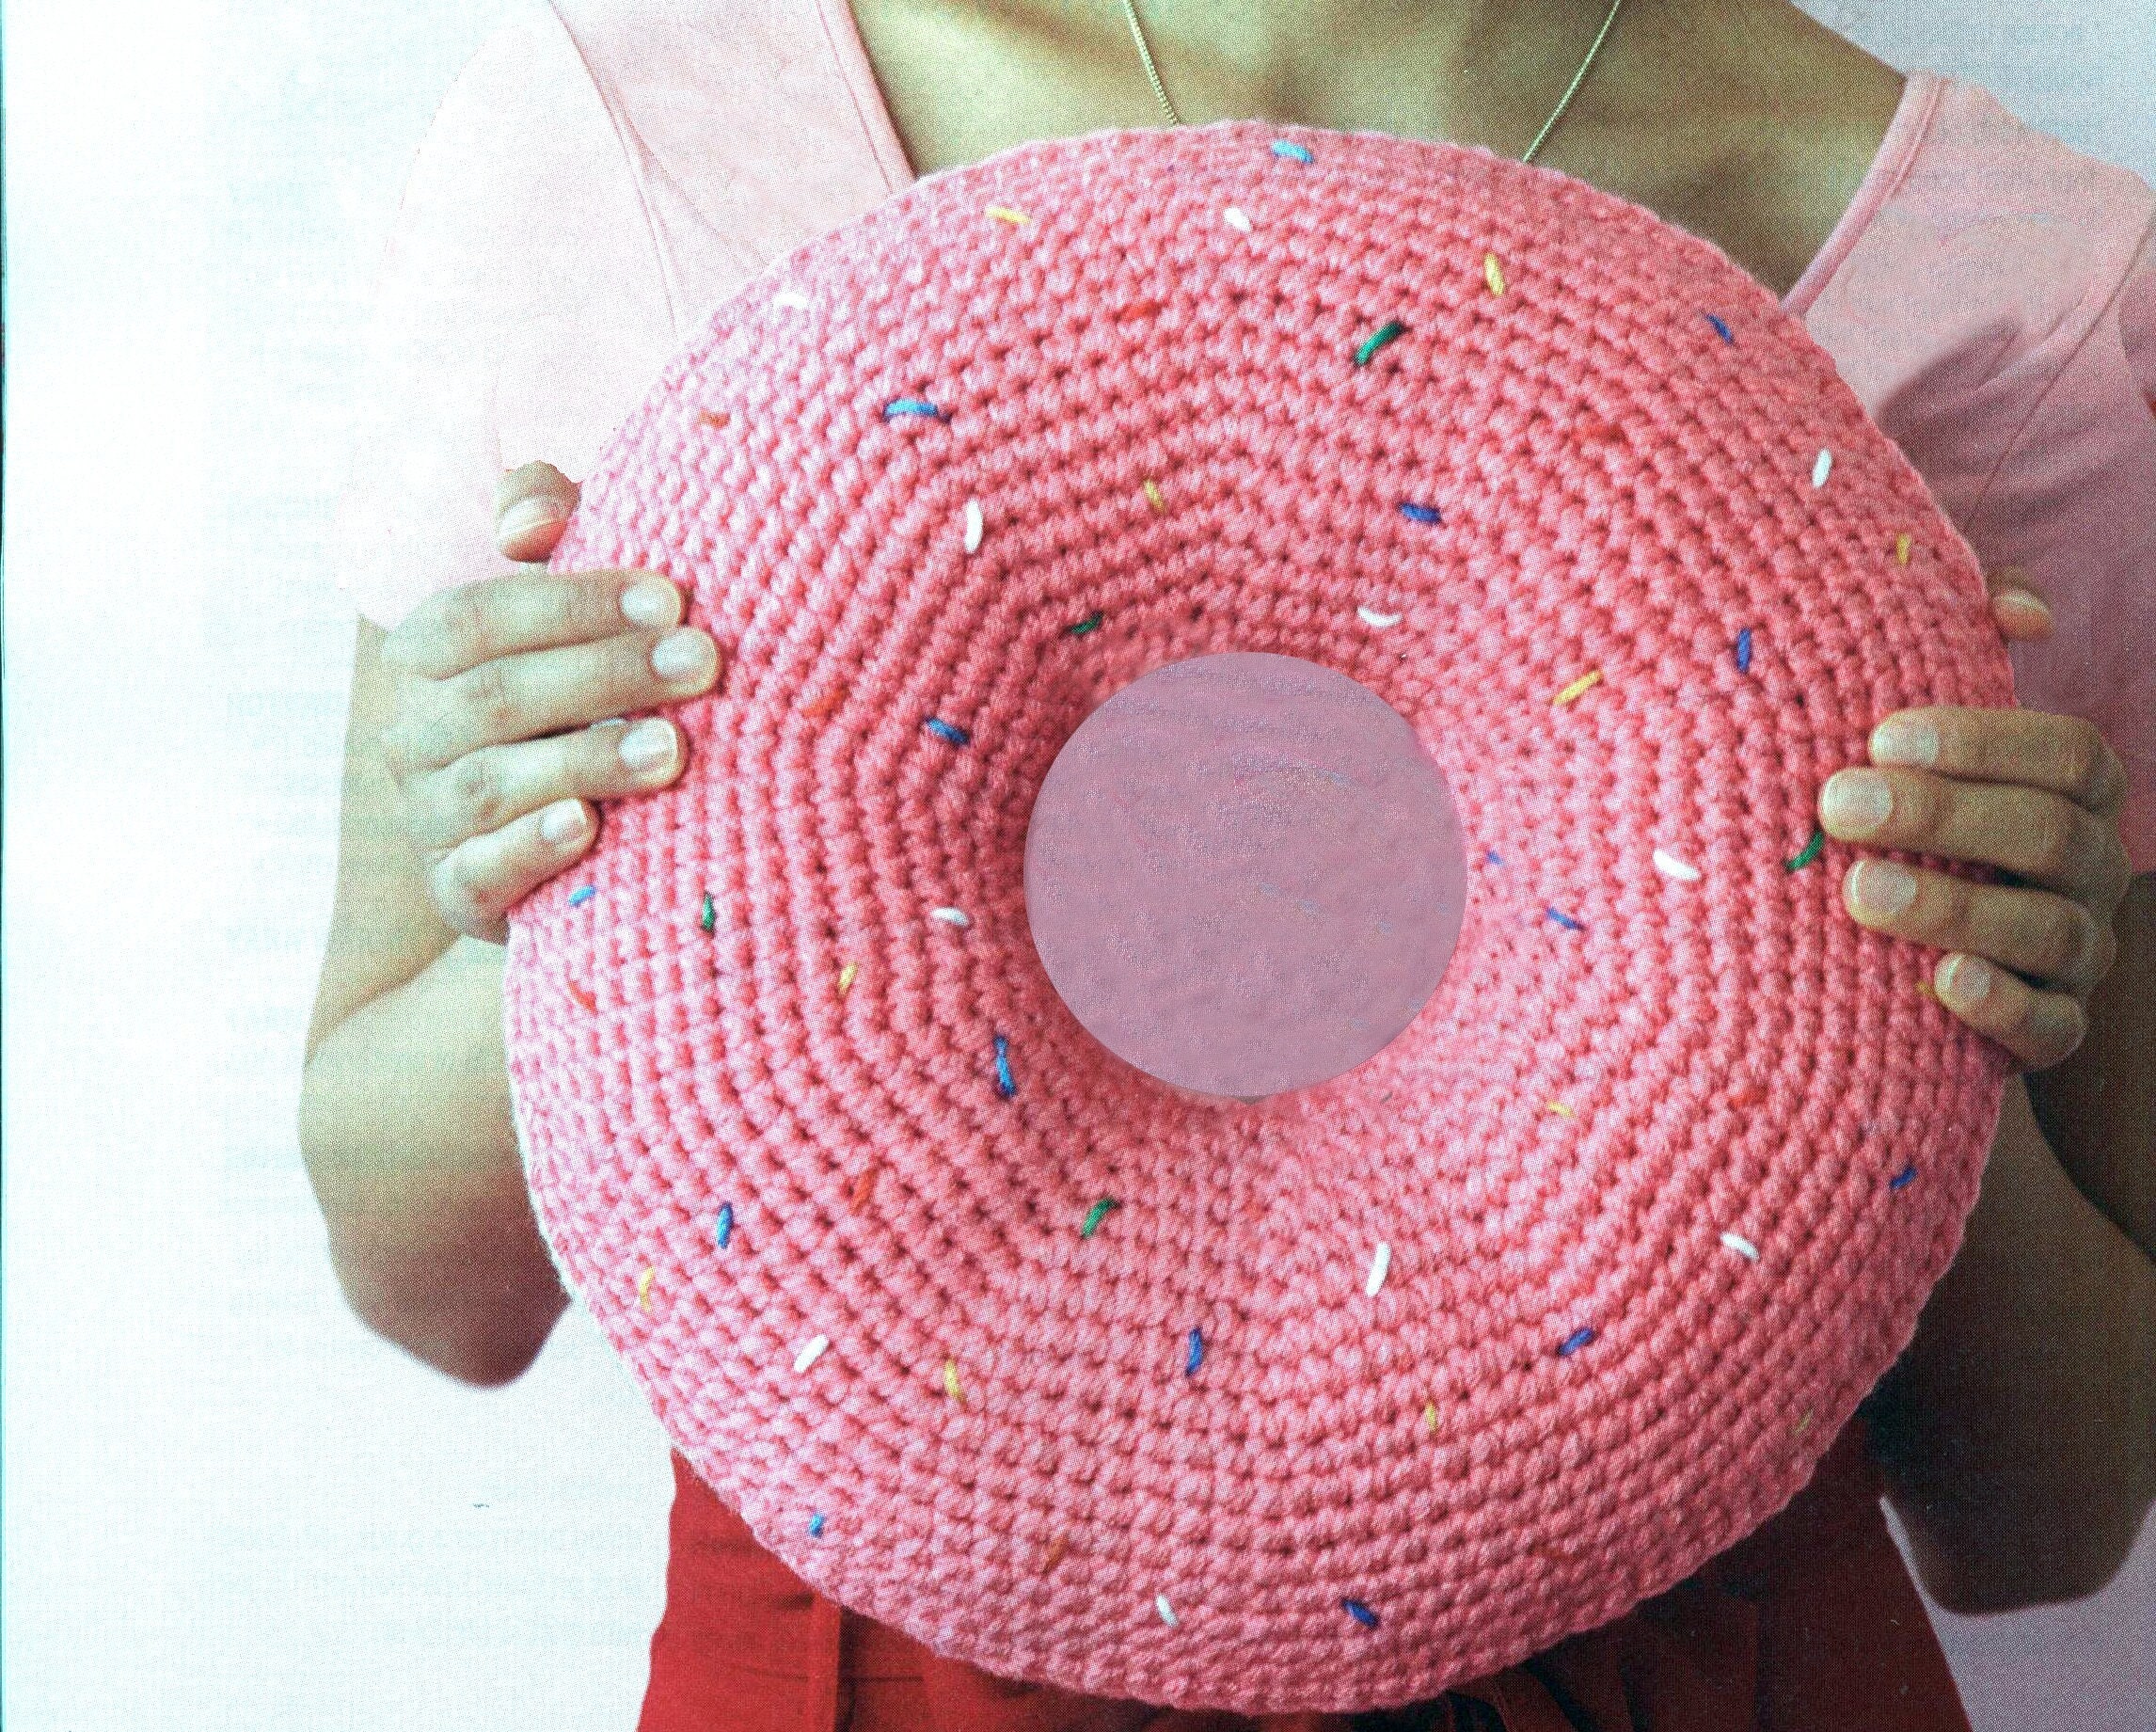 Crochet Donut Pillows Are The Stuff Sweet Dreams Are Made Of